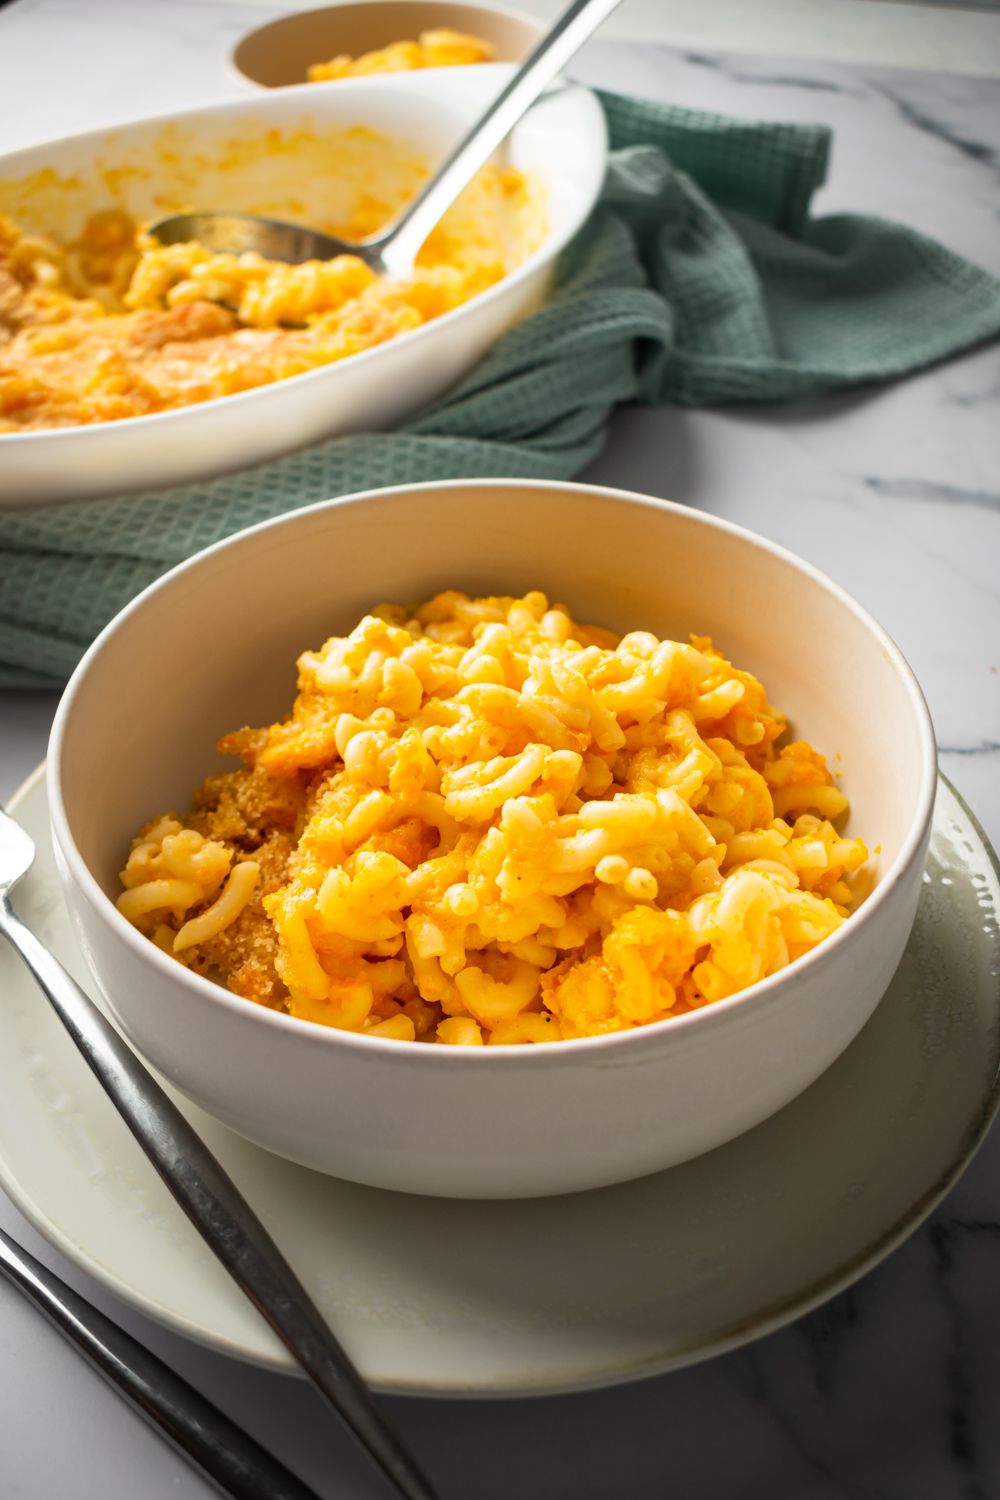 Carrot macaroni and cheese on a bowl with a cheddar cheese sauce and elbow macaroni.